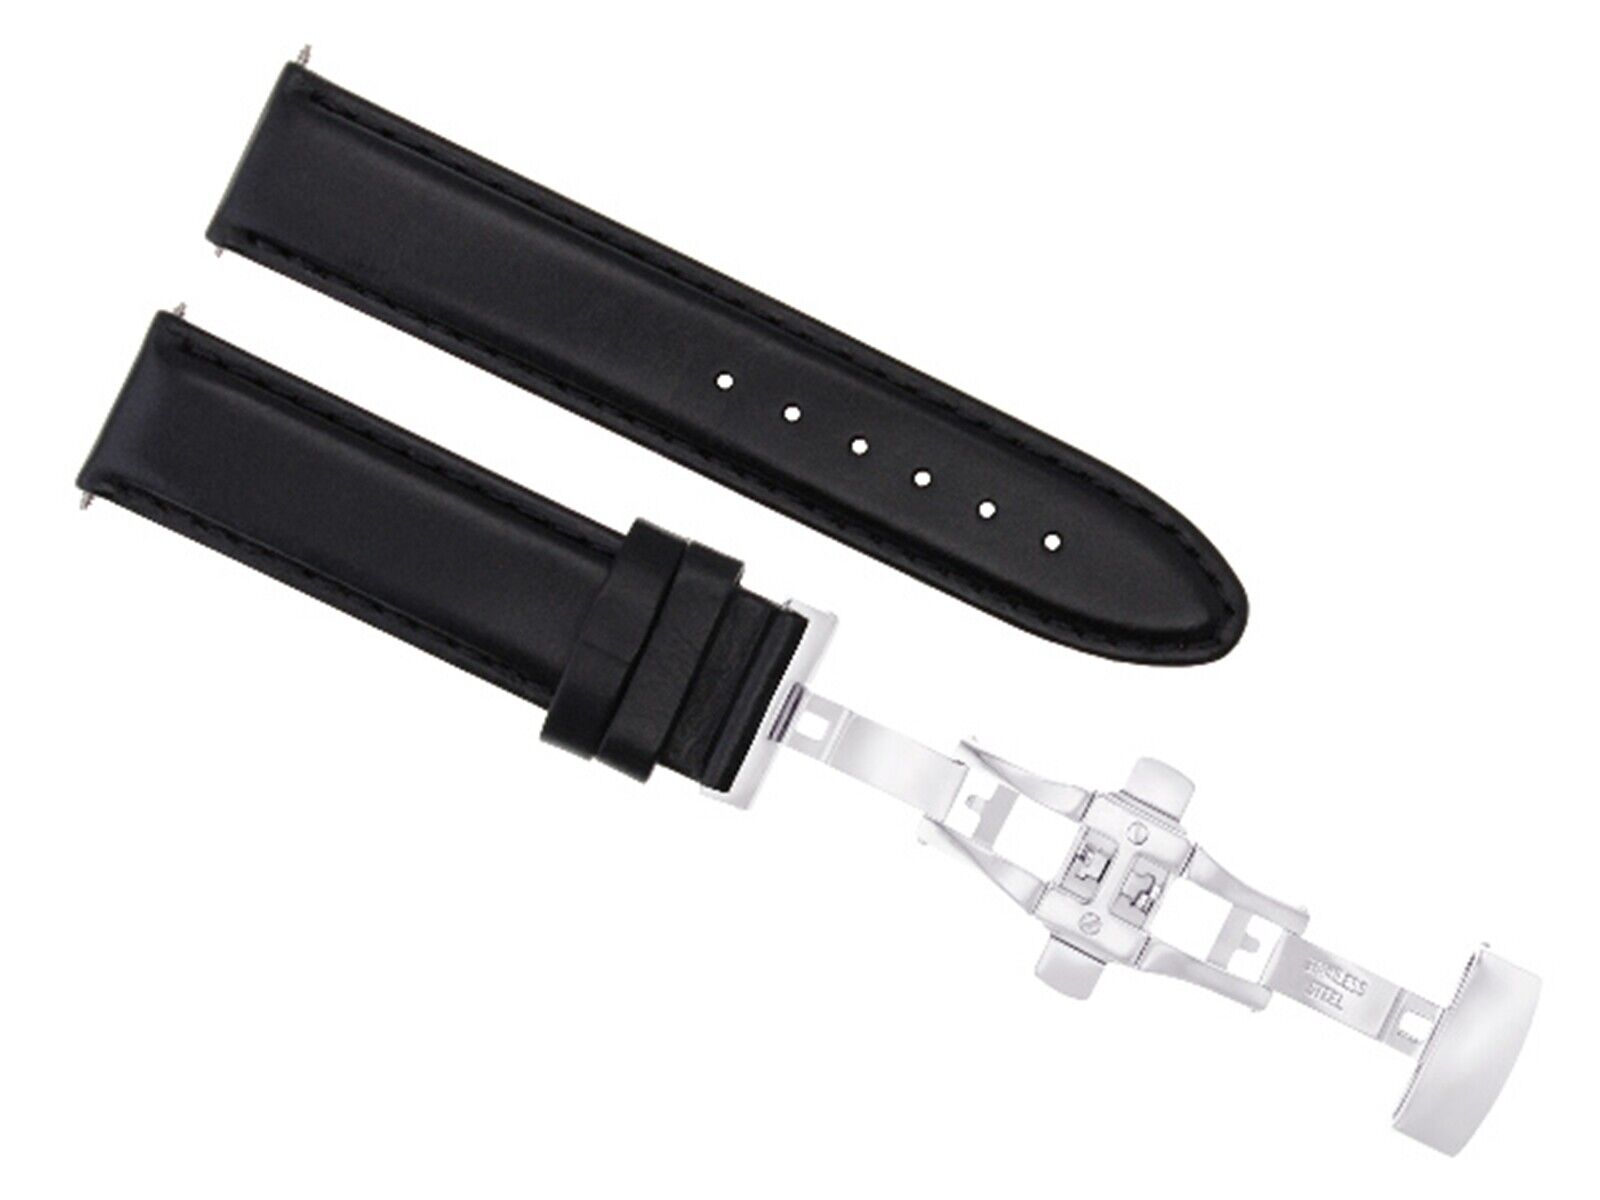 22MM SMOOTH LEATHER WATCH BAND STRAP FOR CHOPARD WATCH  DEPLOYMENT CLASP BLACK